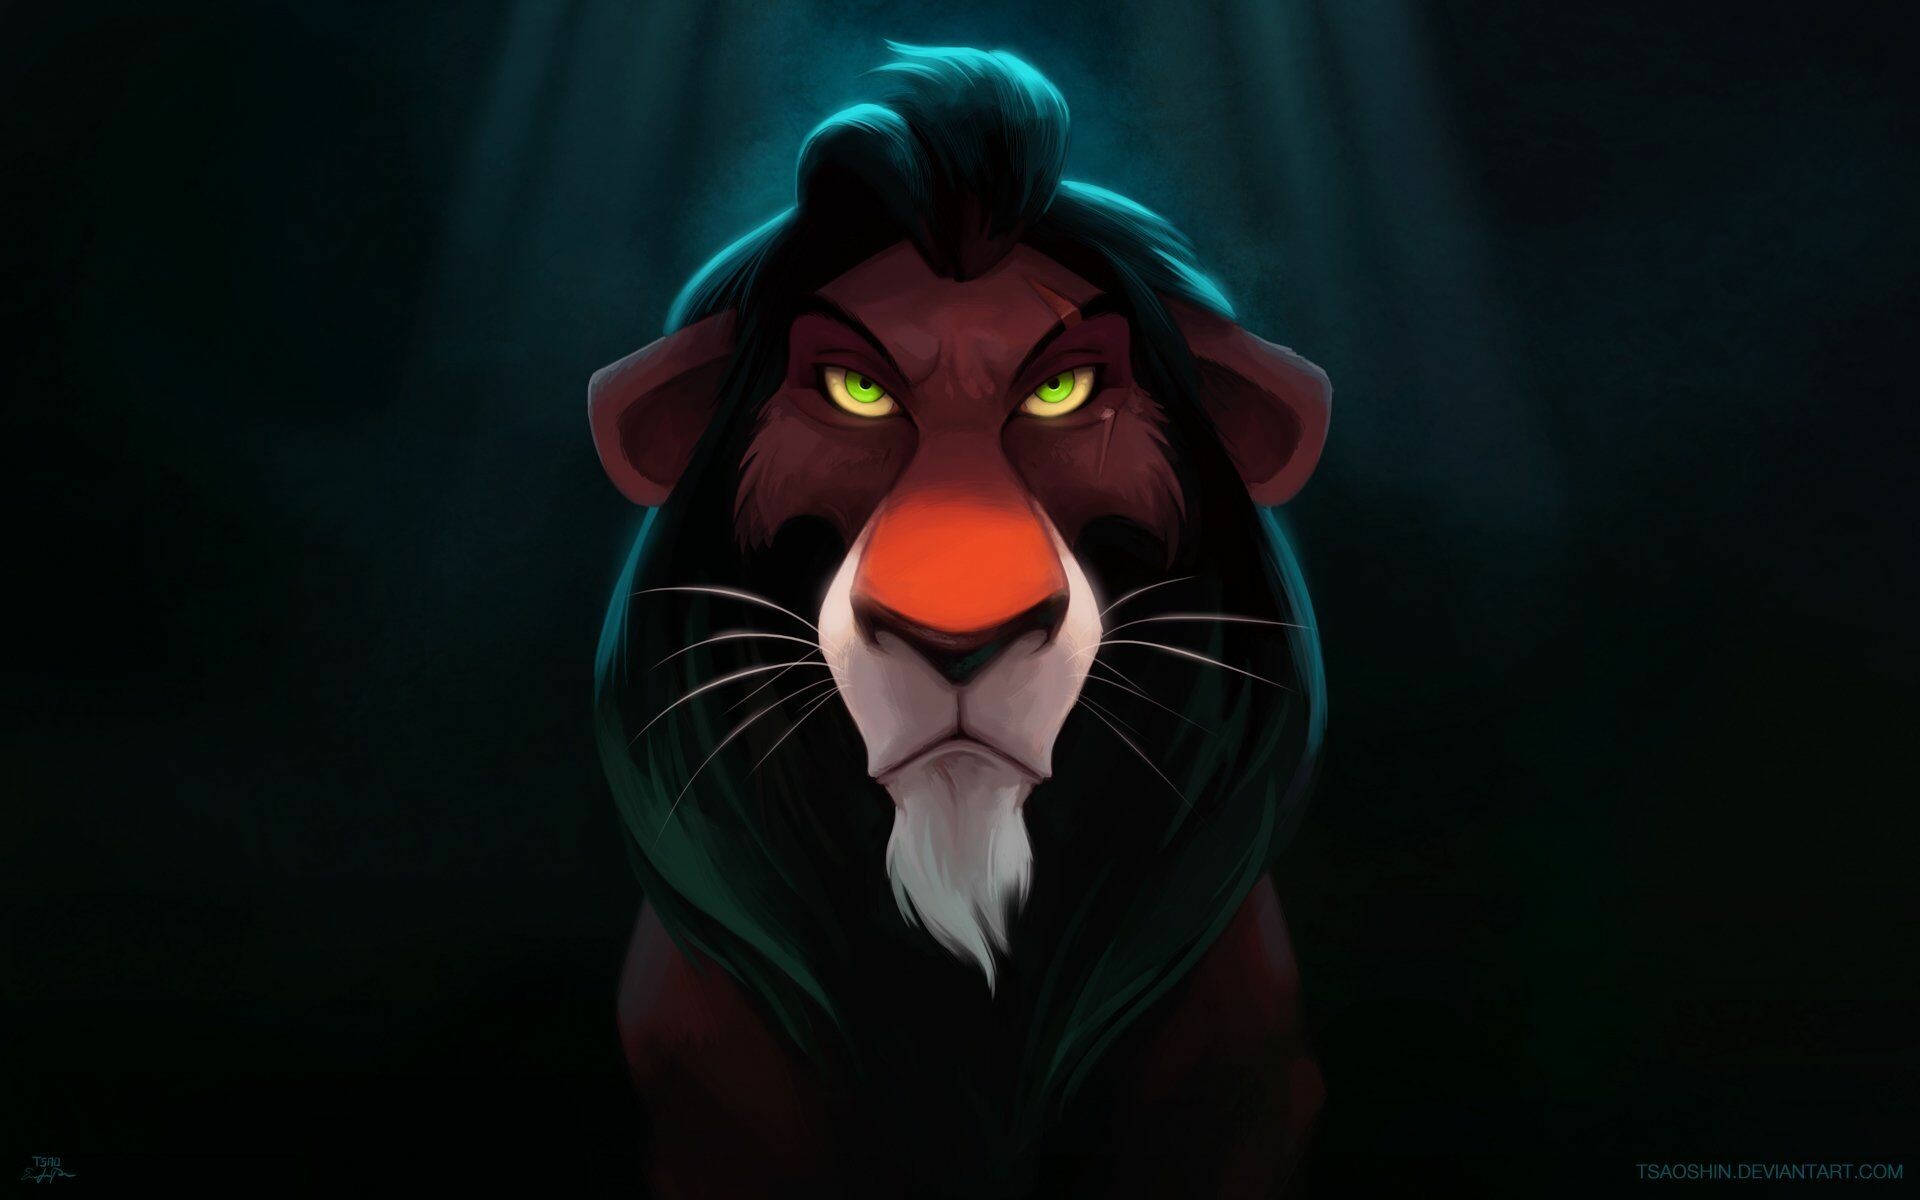 The Lion King: Scar, Mufasa's younger brother and rival, the film's main antagonist, who seizes the throne. 1920x1200 HD Wallpaper.